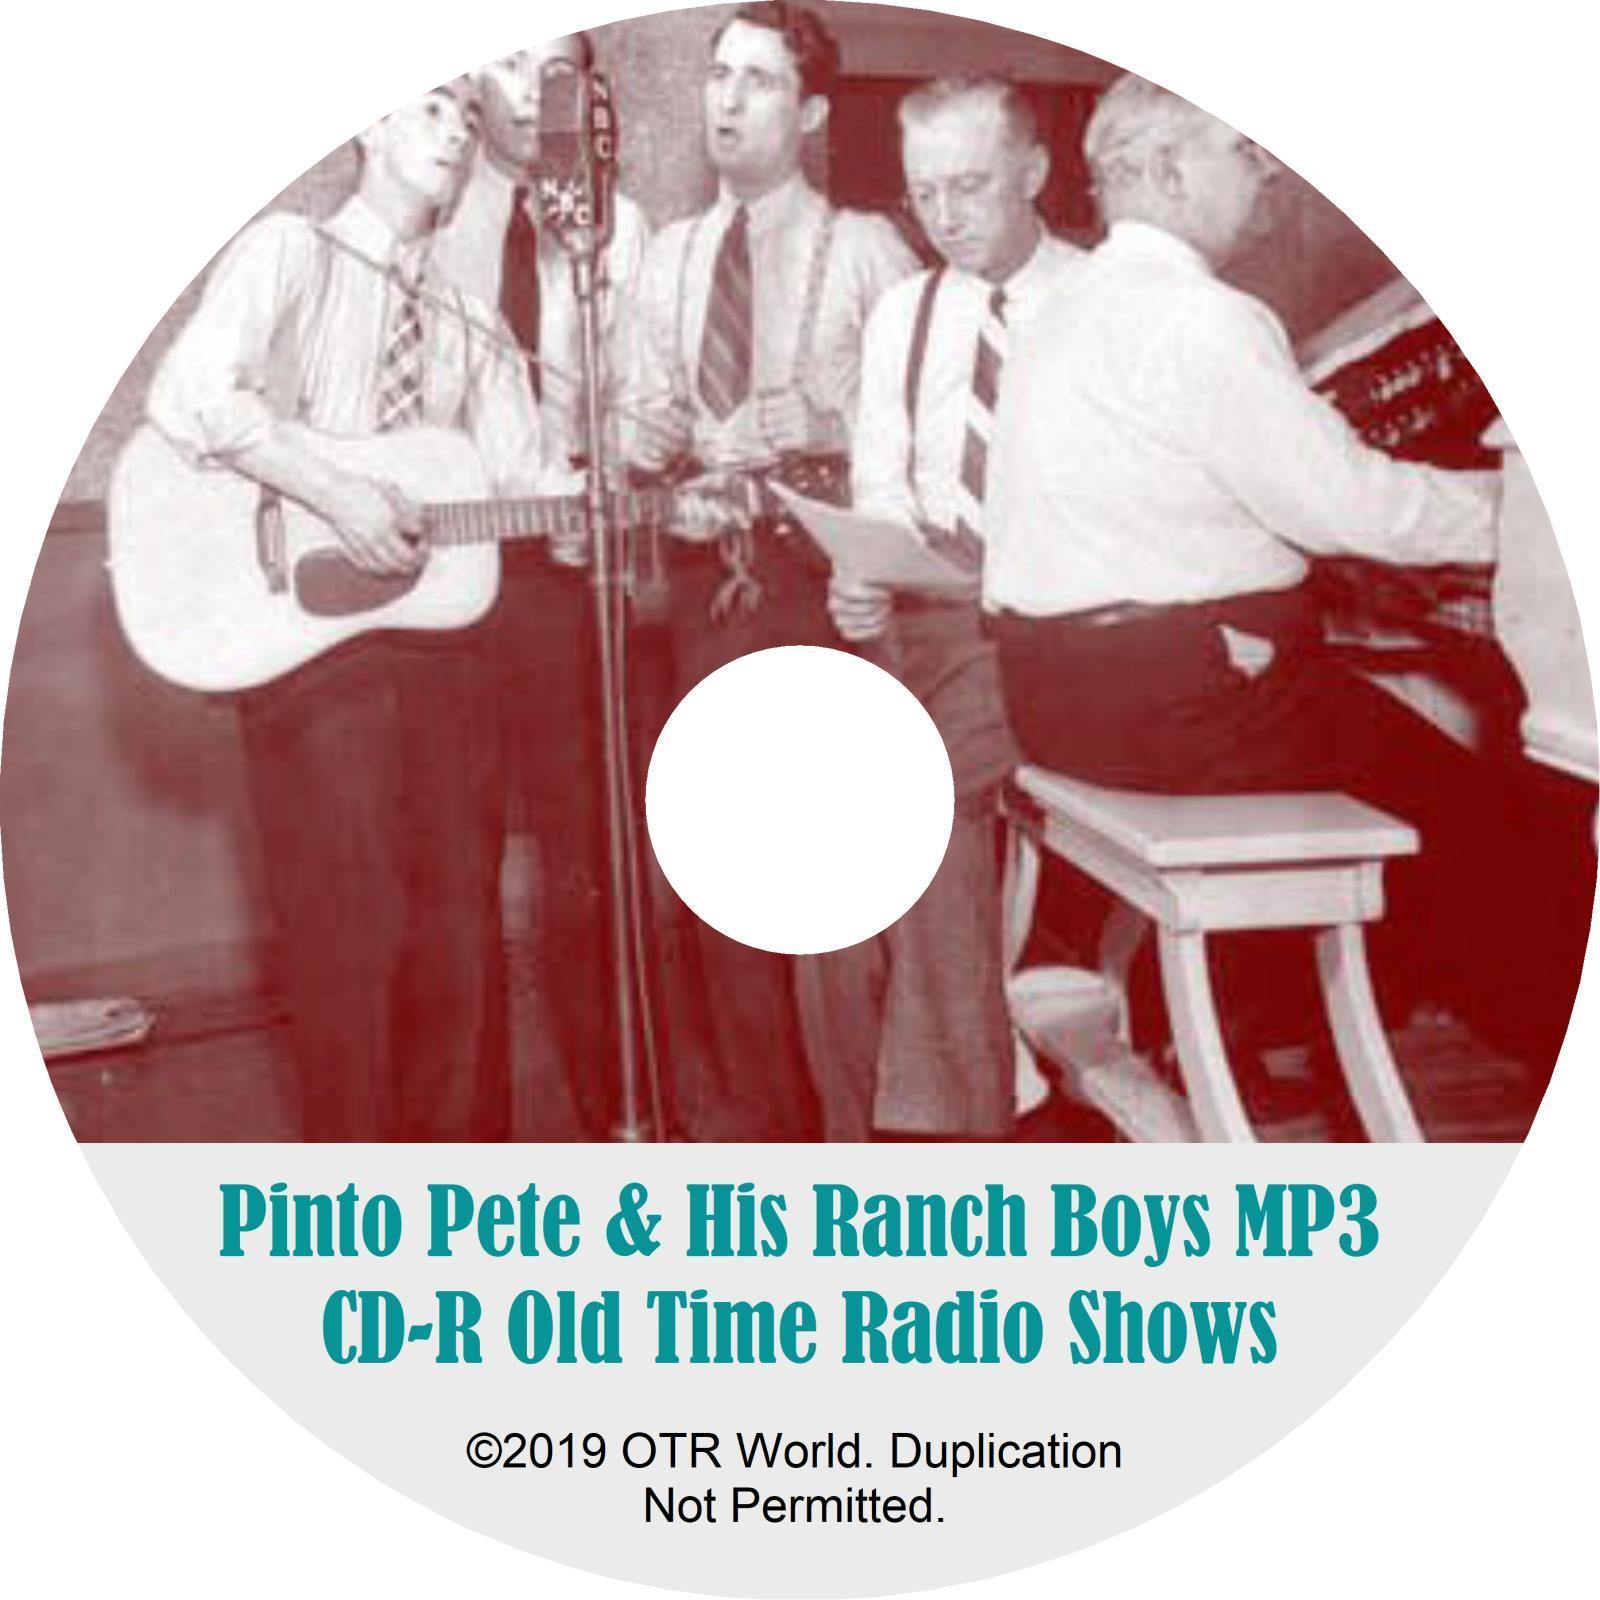 Pinto Pete &amp; His Ranch Boys OTR Old Time Radio Shows MP3 On CD 104 Episodes - OTR World